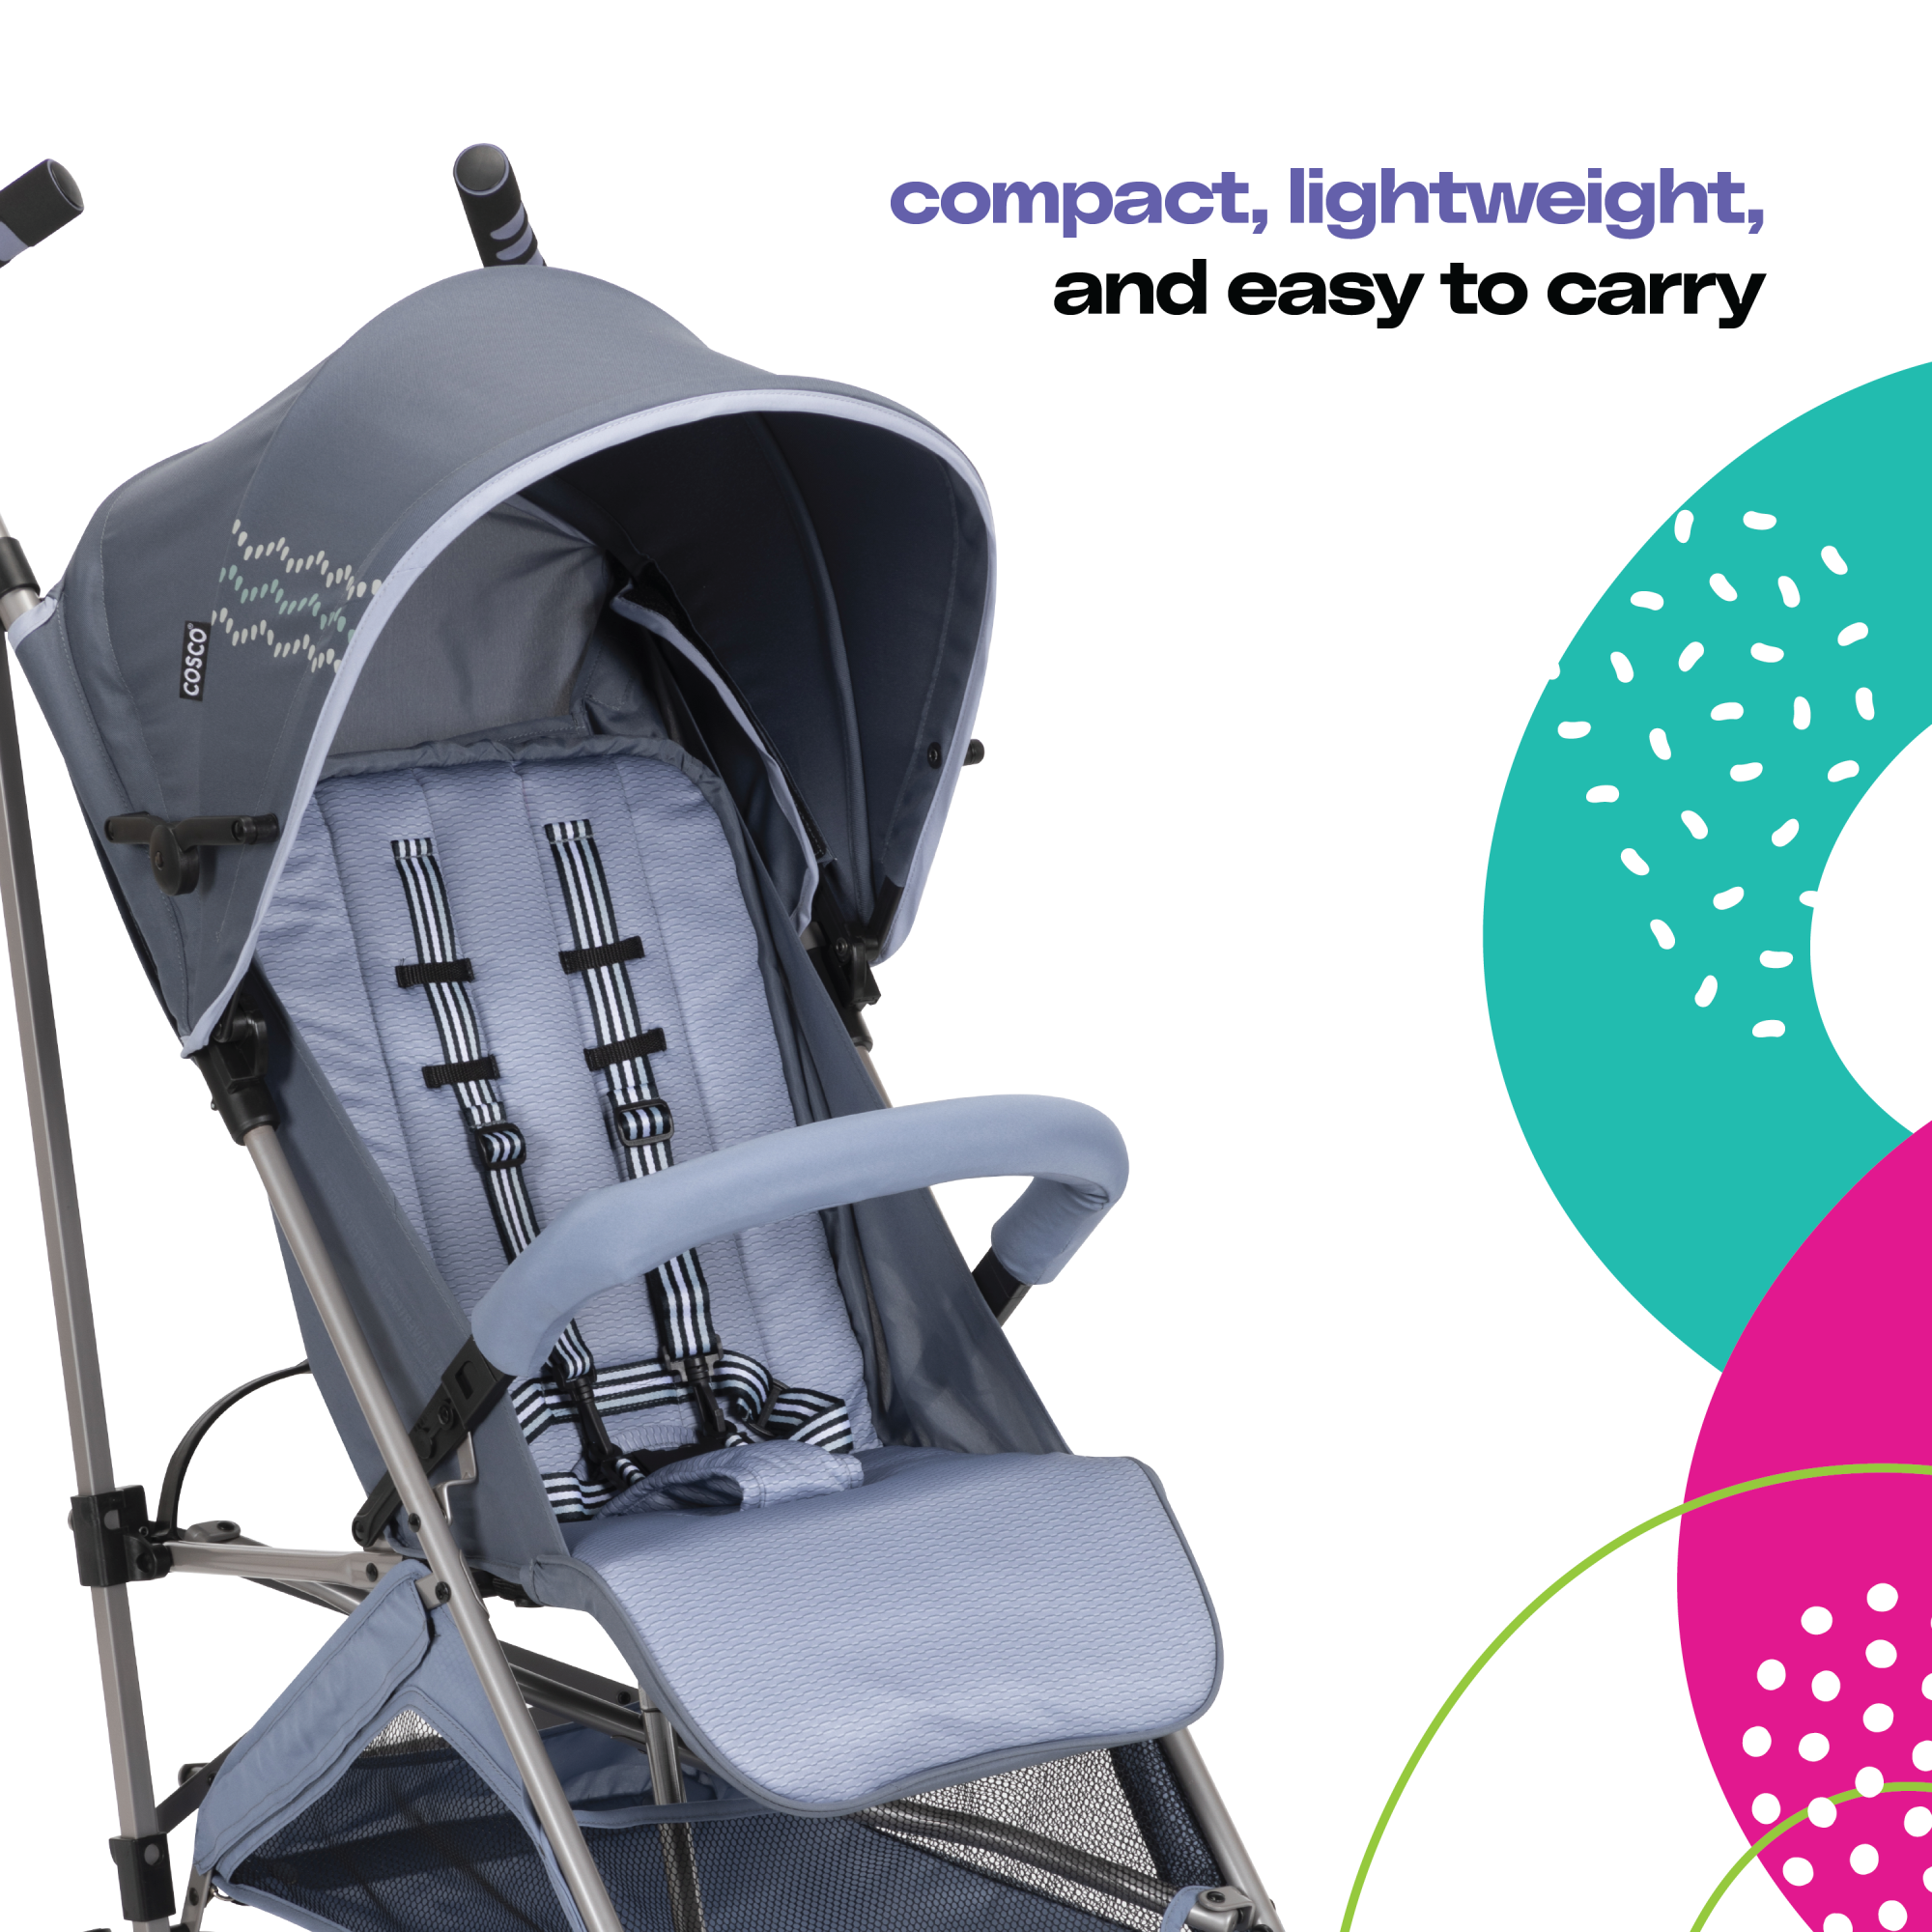 Cosco Kids™ Simple Fold Compact Stroller - Organic Waves - compact, lightweight, and easy to carry